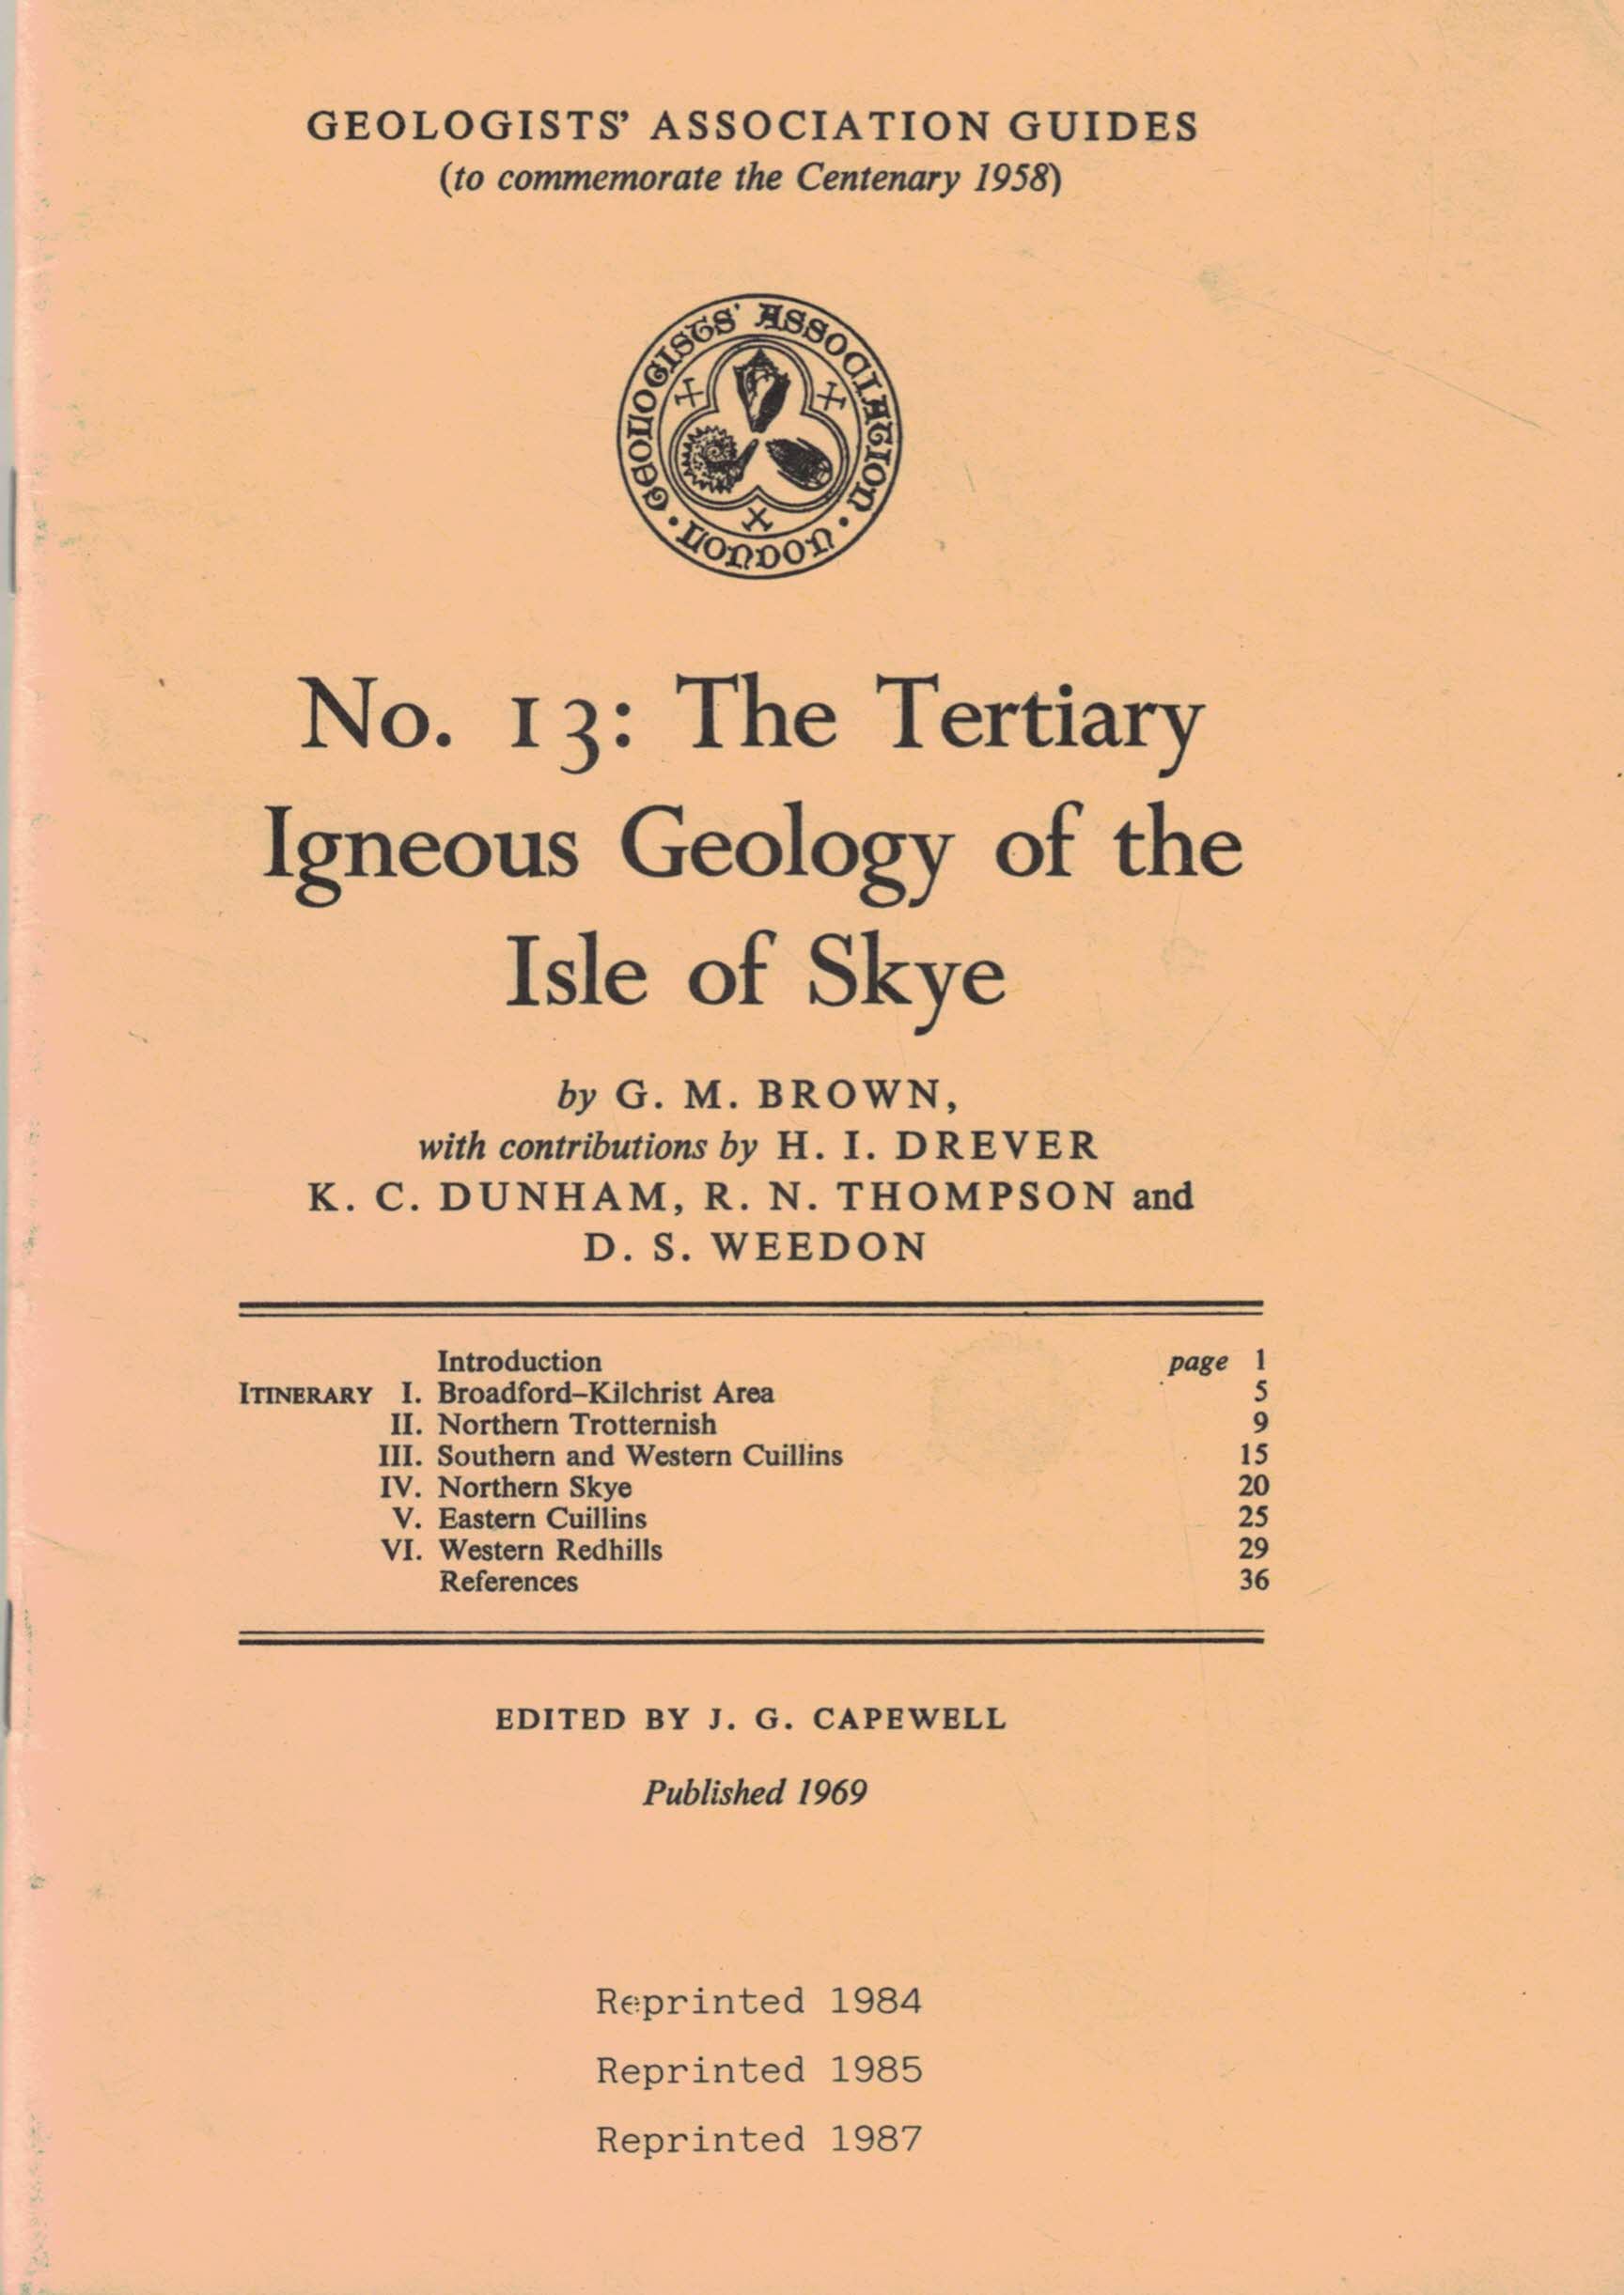 Geologists' Association Guide. Number 13. The Tertiary Igneous Geology of the Isle of Skye.